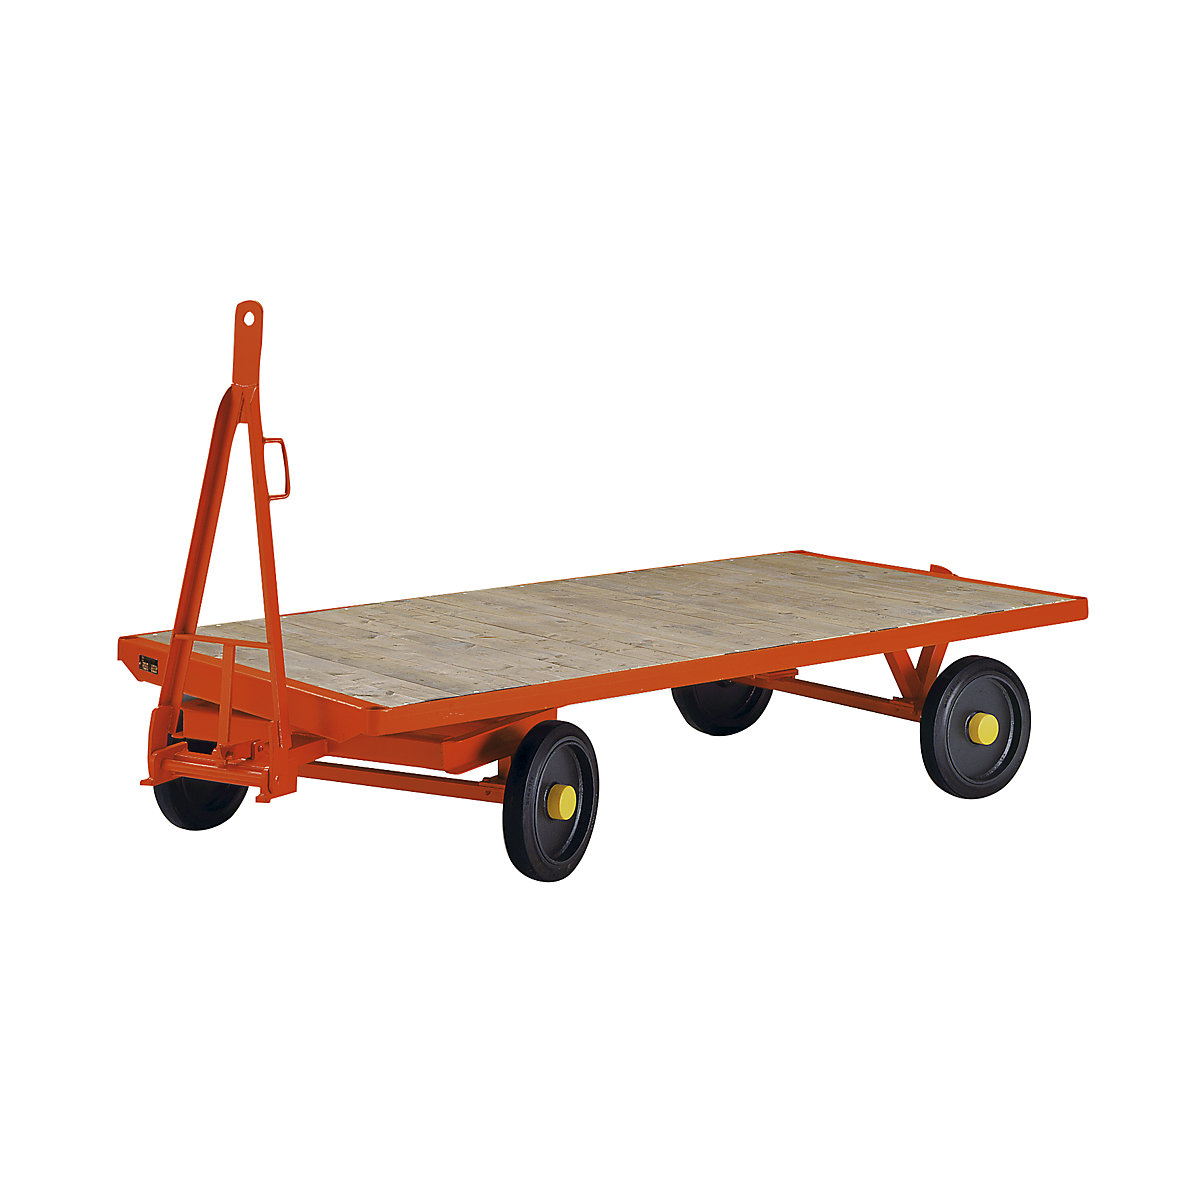 Trailer, 2-wheel turntable steering, max. load 8 t, platform 2.0 x 1.0 m, solid rubber tyres